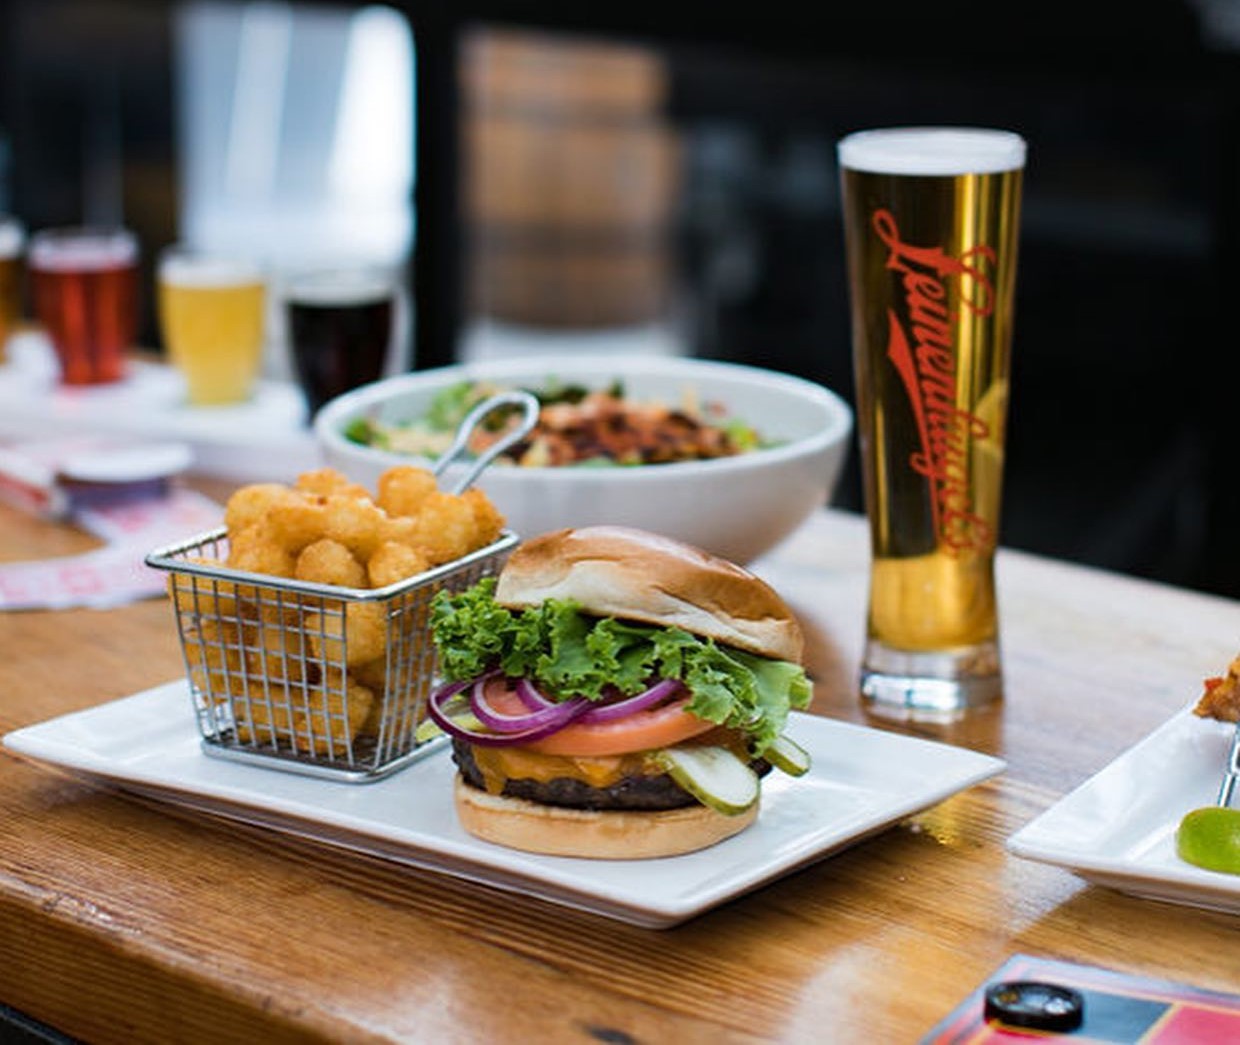 a burger with tater tots, a glass of beer, and other out of focus dishes on a table